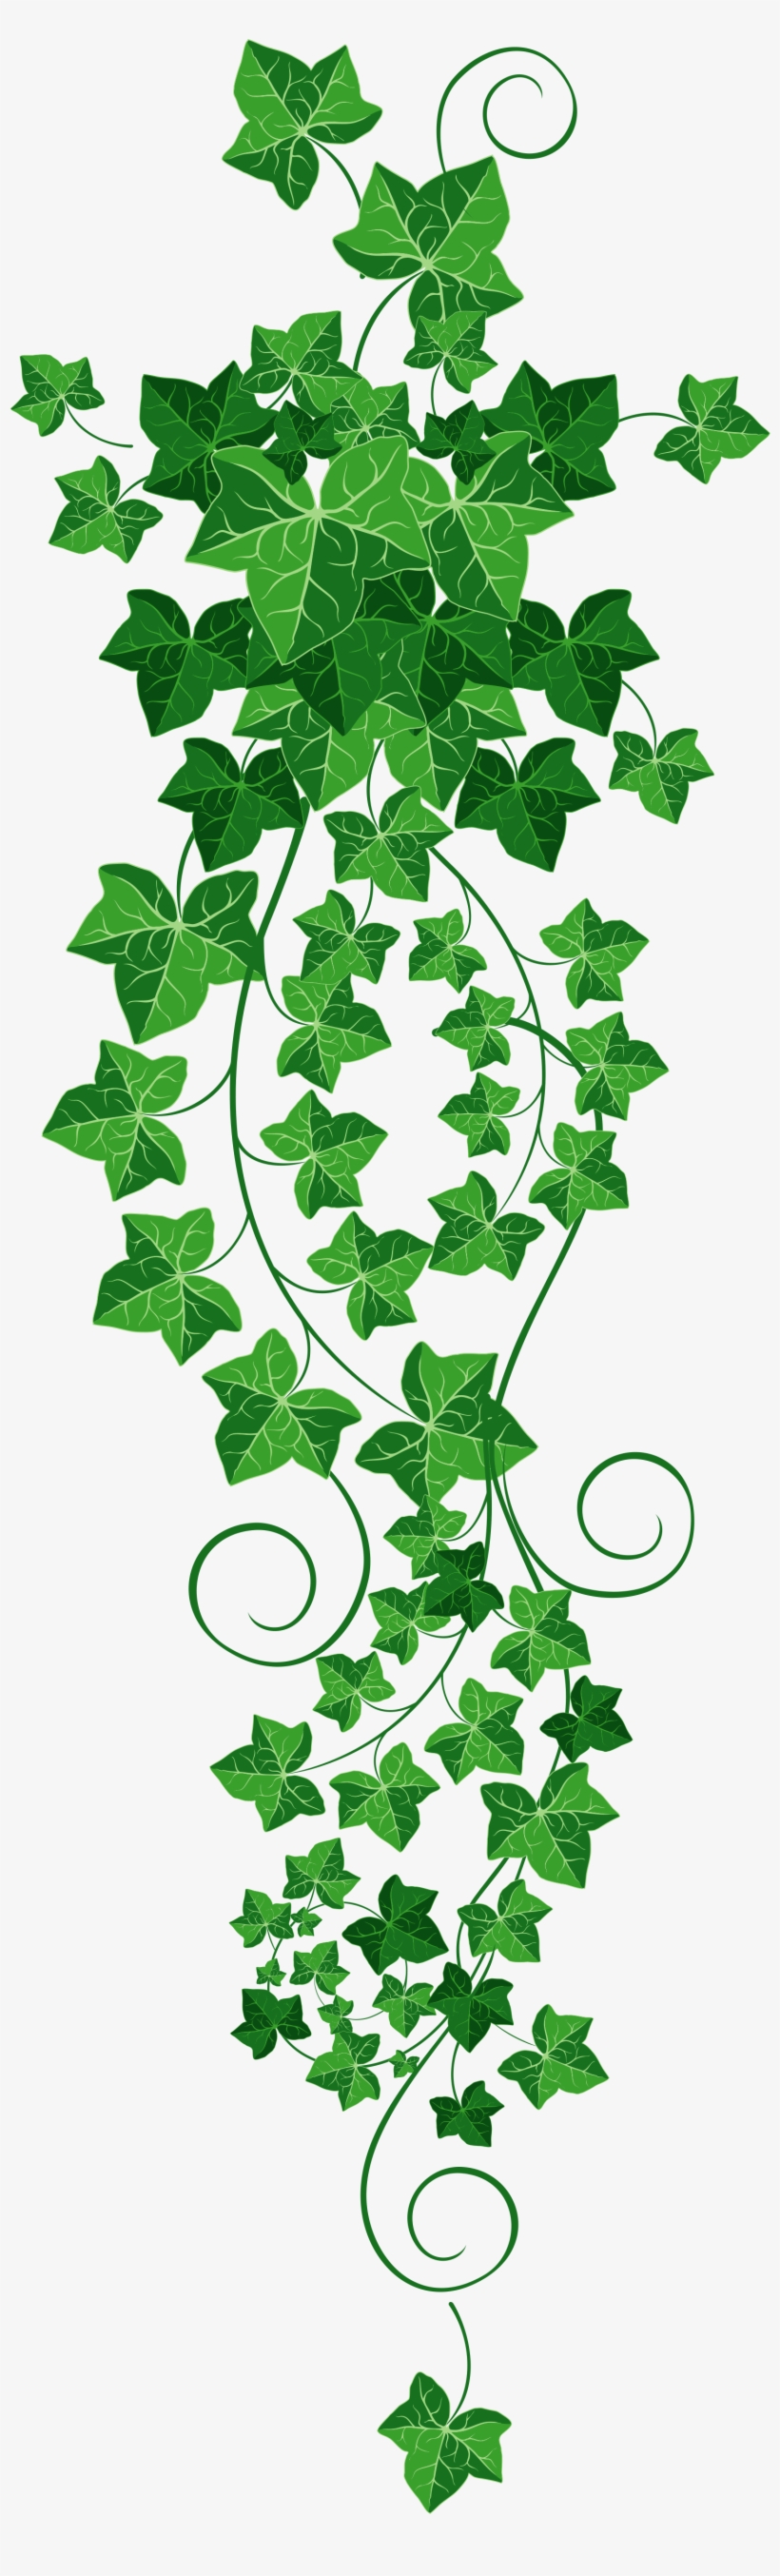 Free Clipart Of An Ivy Border Clip Art Library 6788